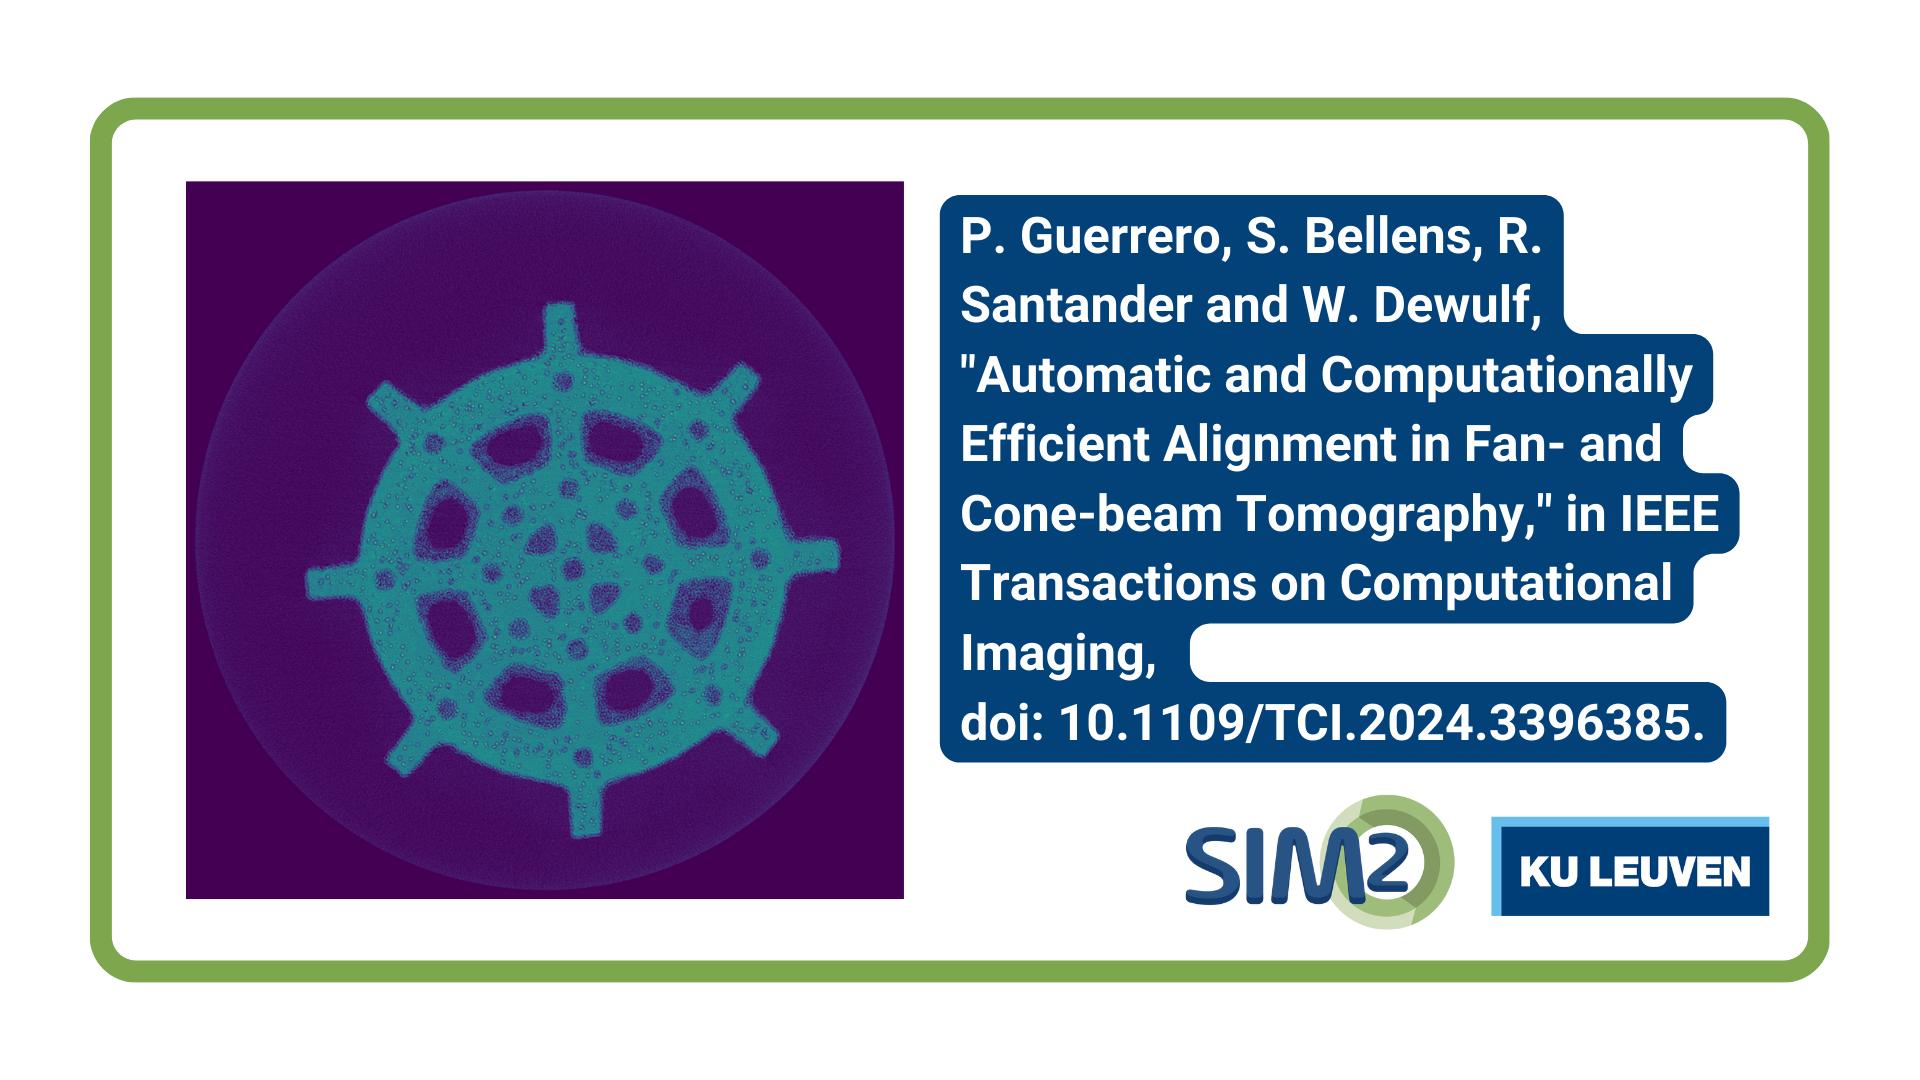 695fb p. guerrero s. bellens r. santander and w. dewulf automatic and computationally efficient alignment in fan and cone beam tomography in ieee transactions on computational imaging 16.9 2